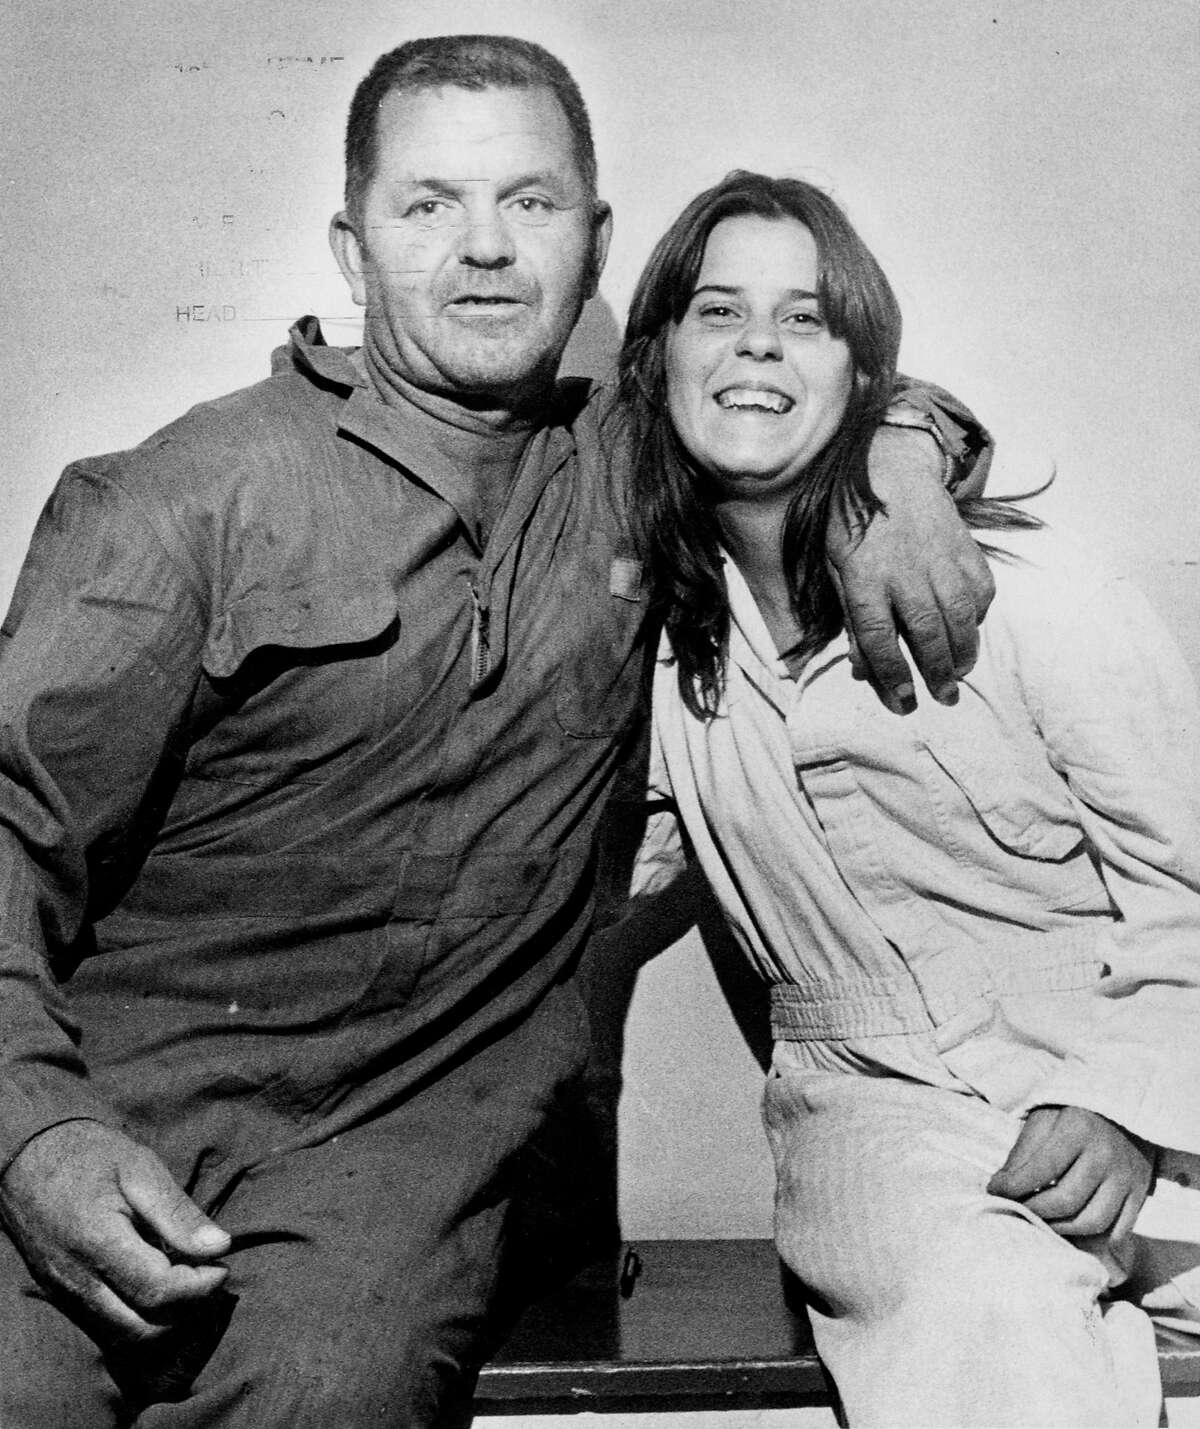 In this undated file photo, bus driver Frank Edward Ray Jr. shown with a happy passenger at Santa Rita after the Chowchilla, California kidnapping rescue. (Dick Schmidt/Sacramento Bee/MCT)